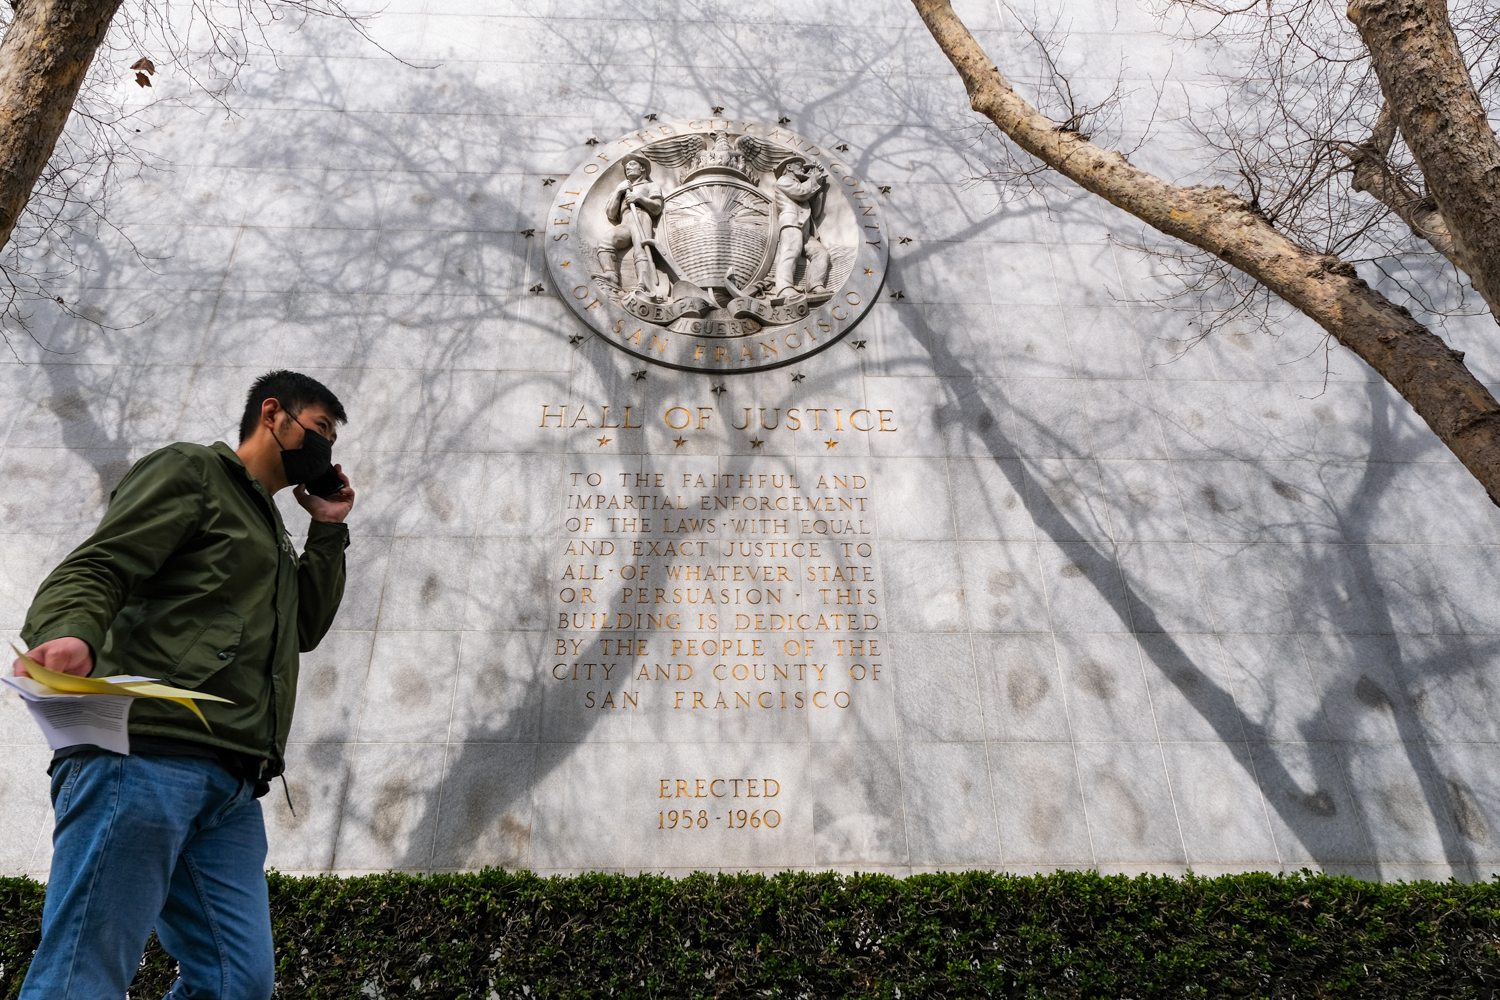 A man walks by a wall with an inscribed seal marked &quot;Hall of Justice&quot; and text on dedication by San Francisco's people.